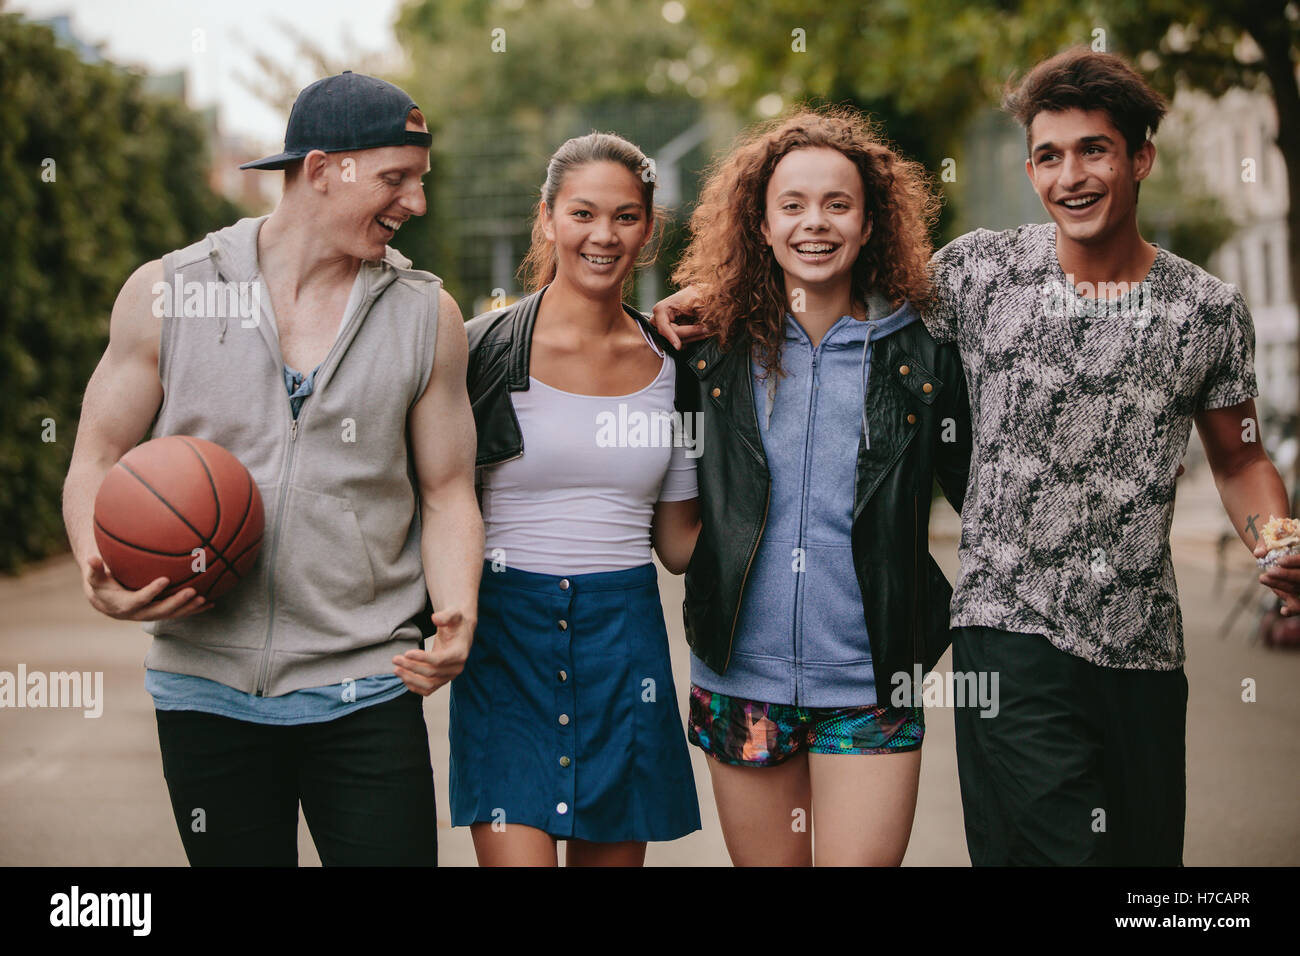 Portrait of four young friends walking together and smiling. Mixed race group of people enjoying a walk outdoors. Stock Photo